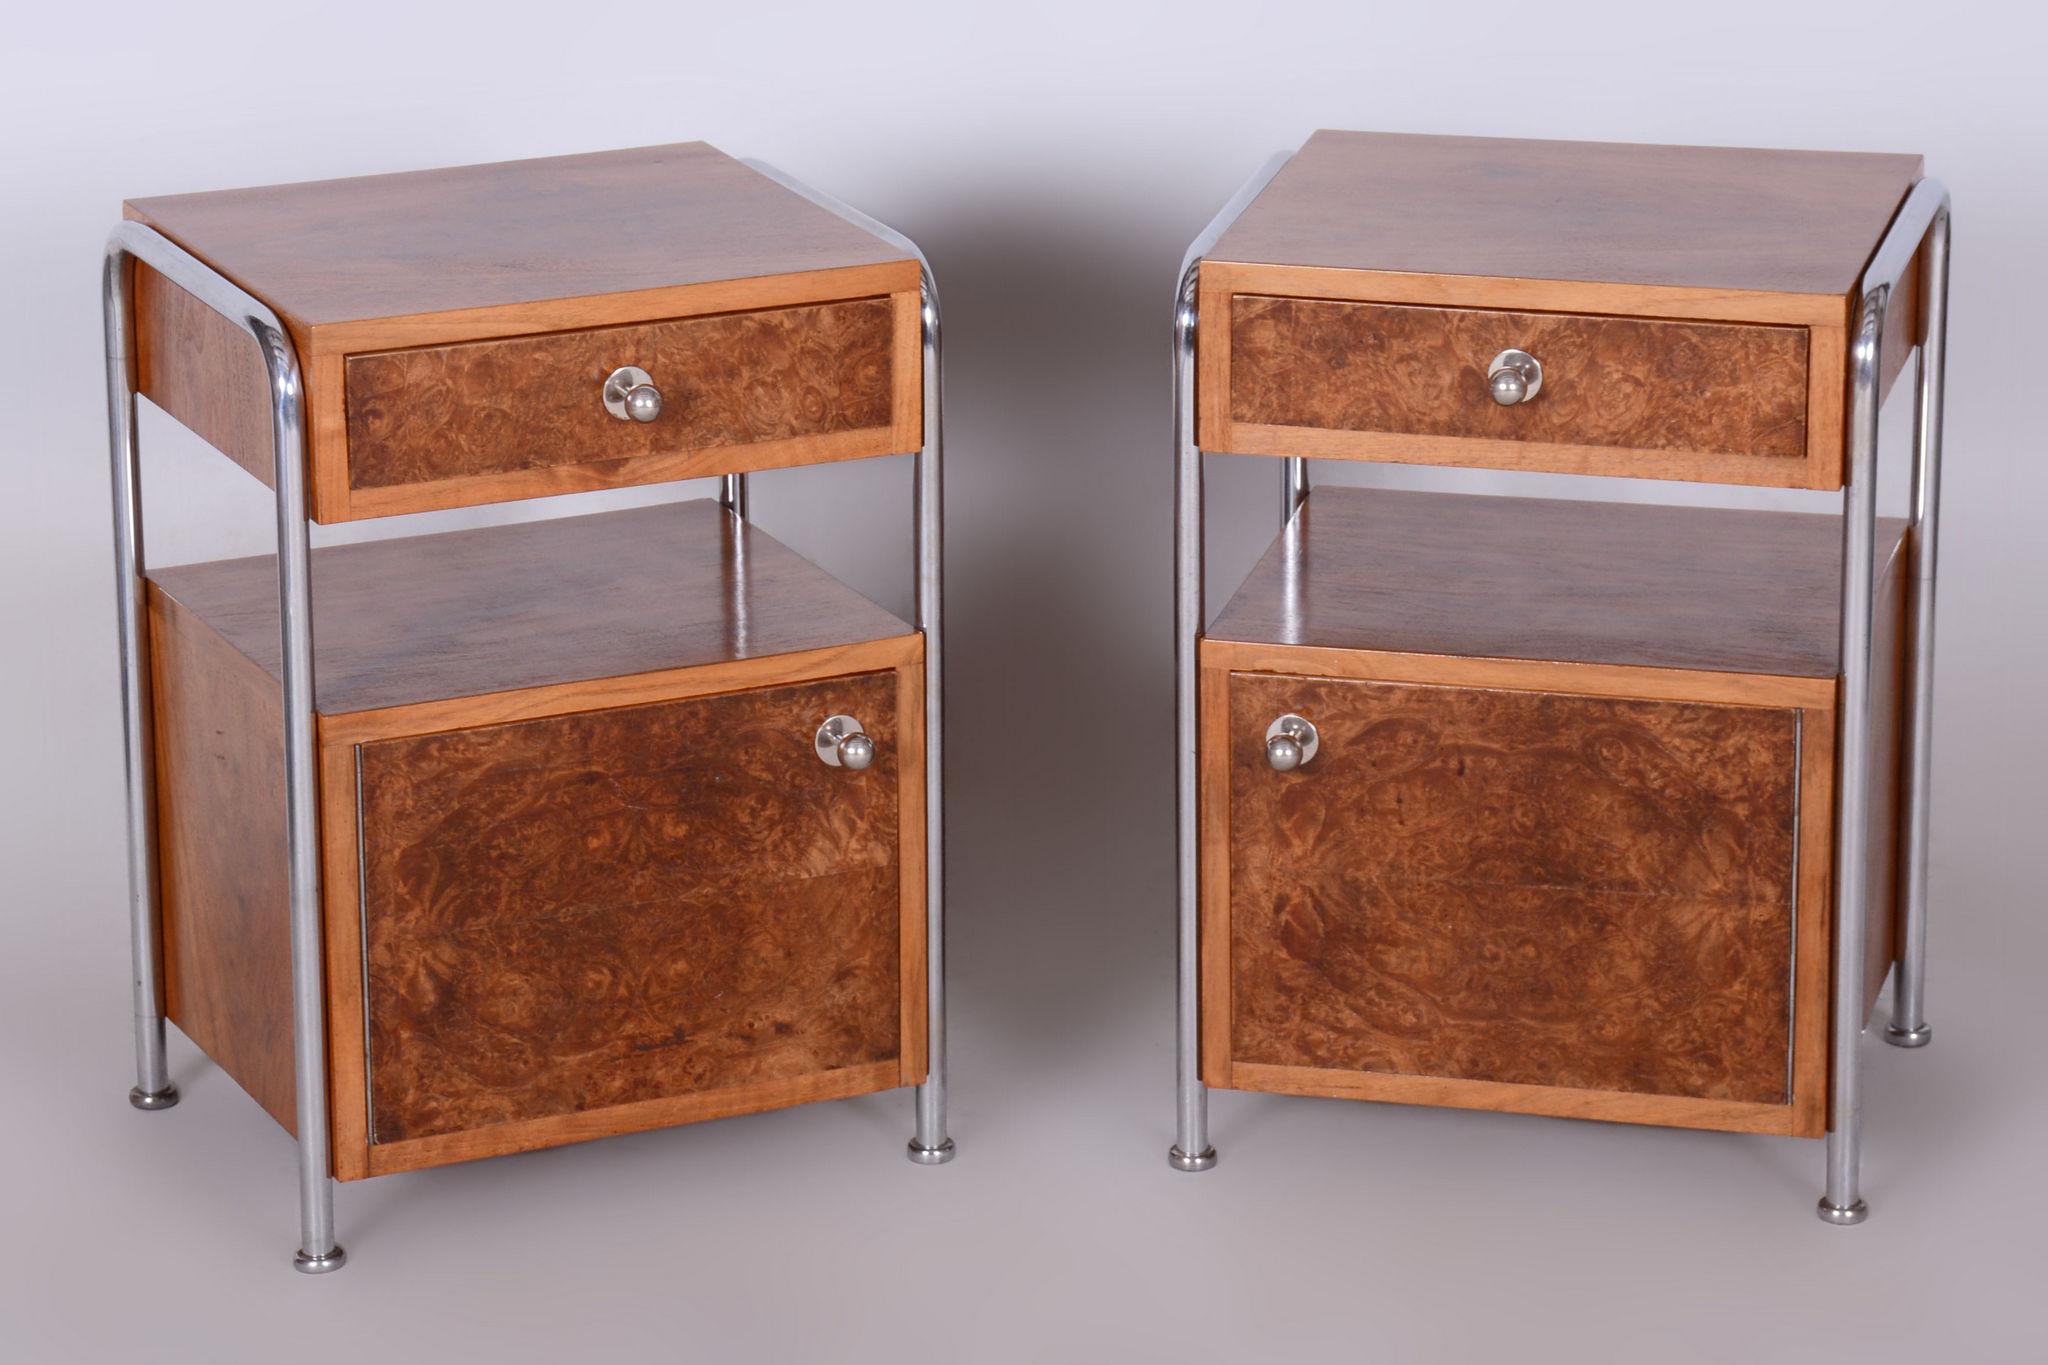 Restored Bauhaus Pair of Bed-Side Tables, Hynek Gottwald.

Period: 1930-1939
Maker: Hynek Gottwald
Source: Czechia (Czechoslovakia)
Material: Chrome-plated steel, lacquered walnut root veneer

Made by Hynek Gottwald, a company credited with being